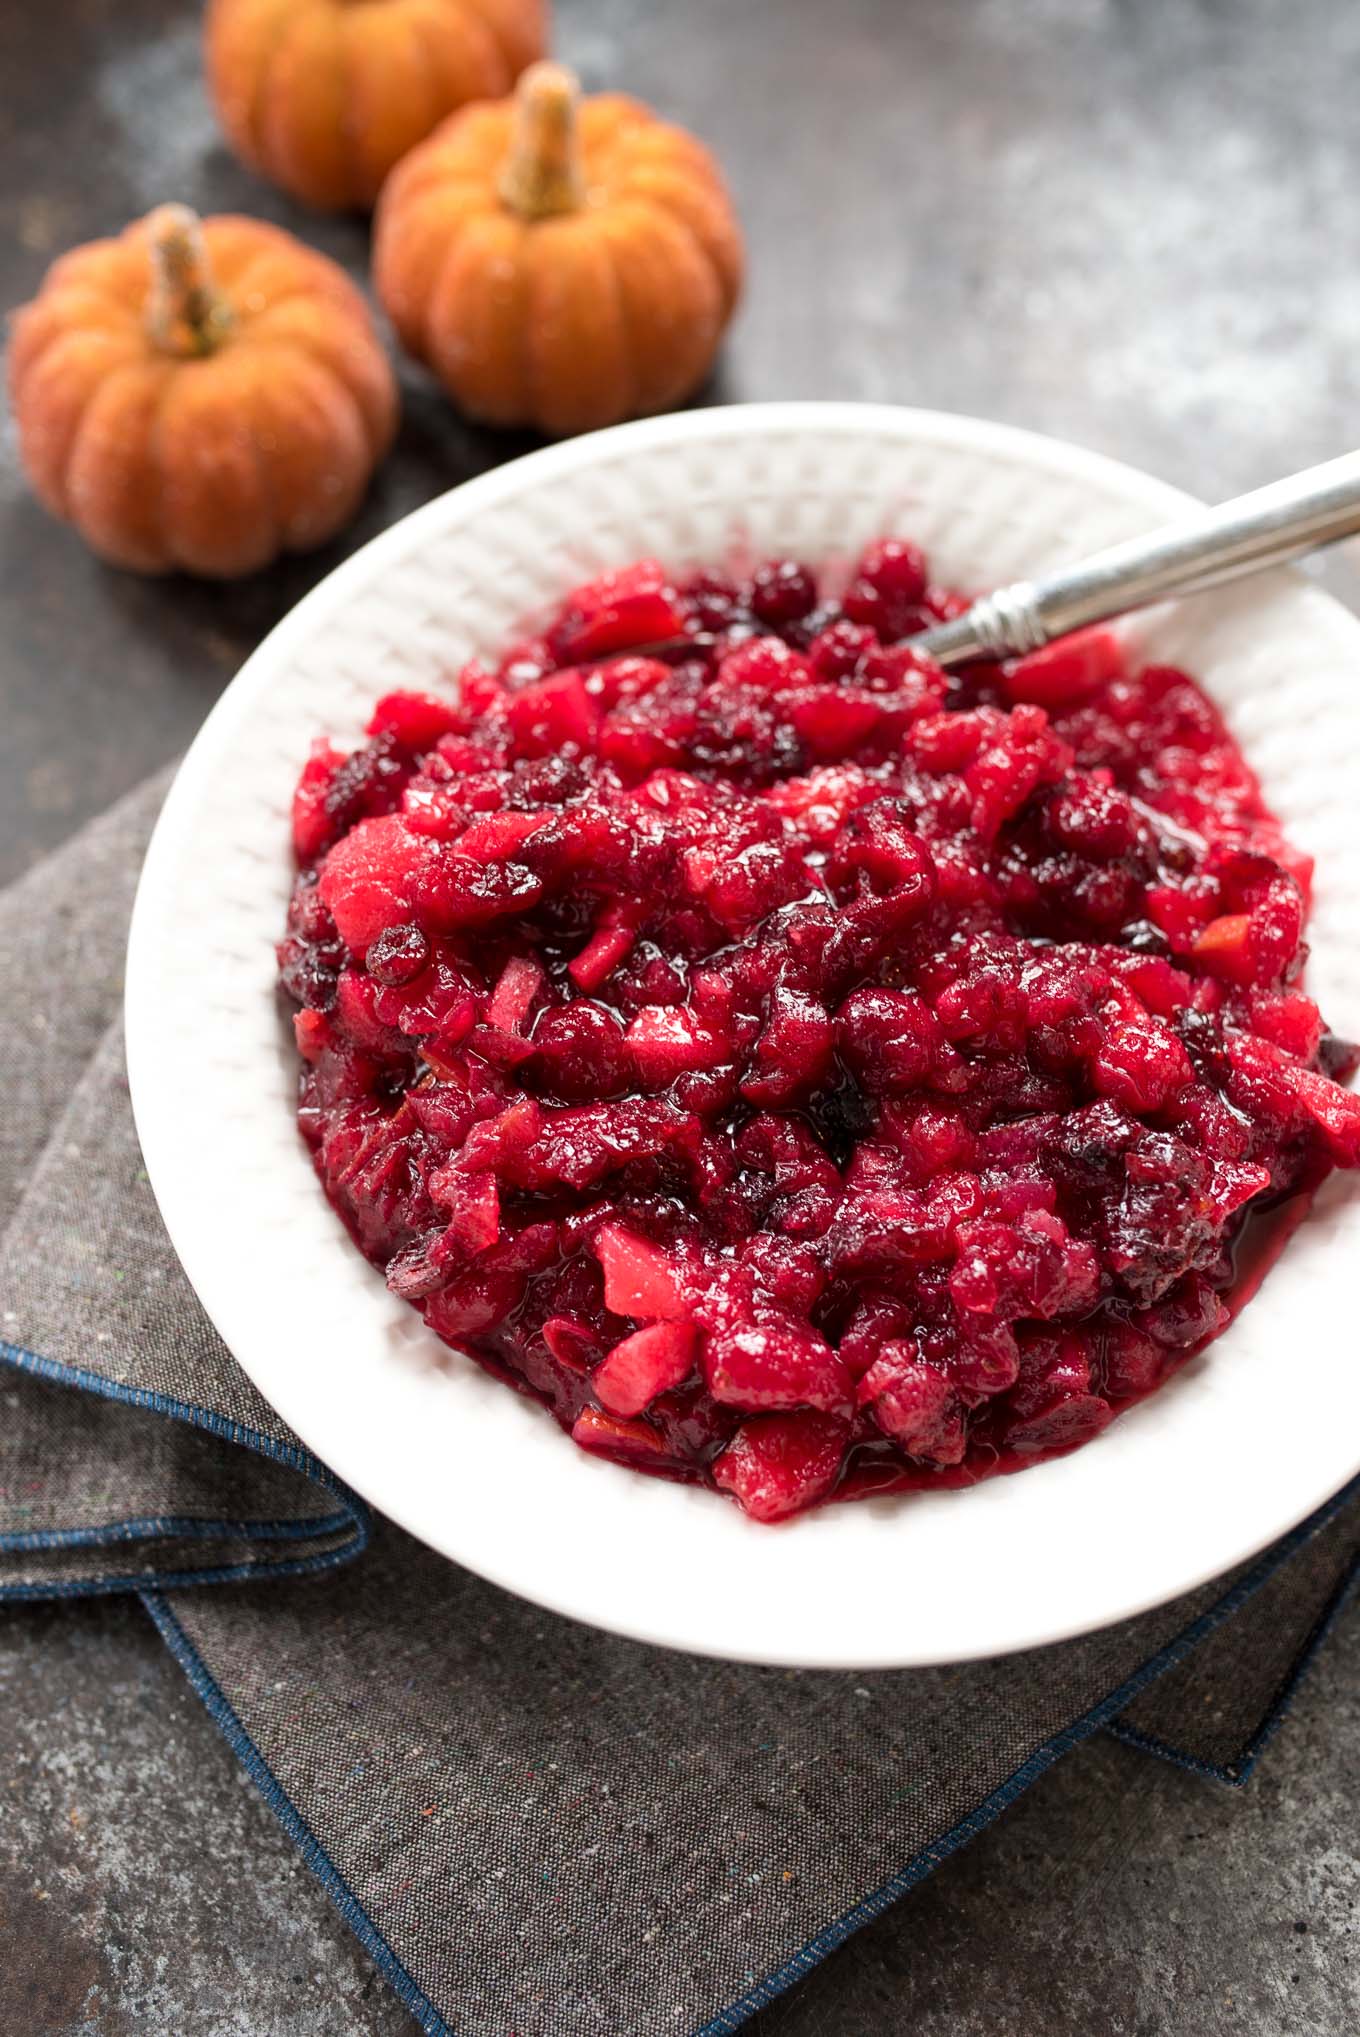 Cranberry Apple Sauce | green apples + lemon and cinnamon make this the perfect cranberry sauce for your Holiday spread. Naturally gluten free! | www.nutritiouseats.com